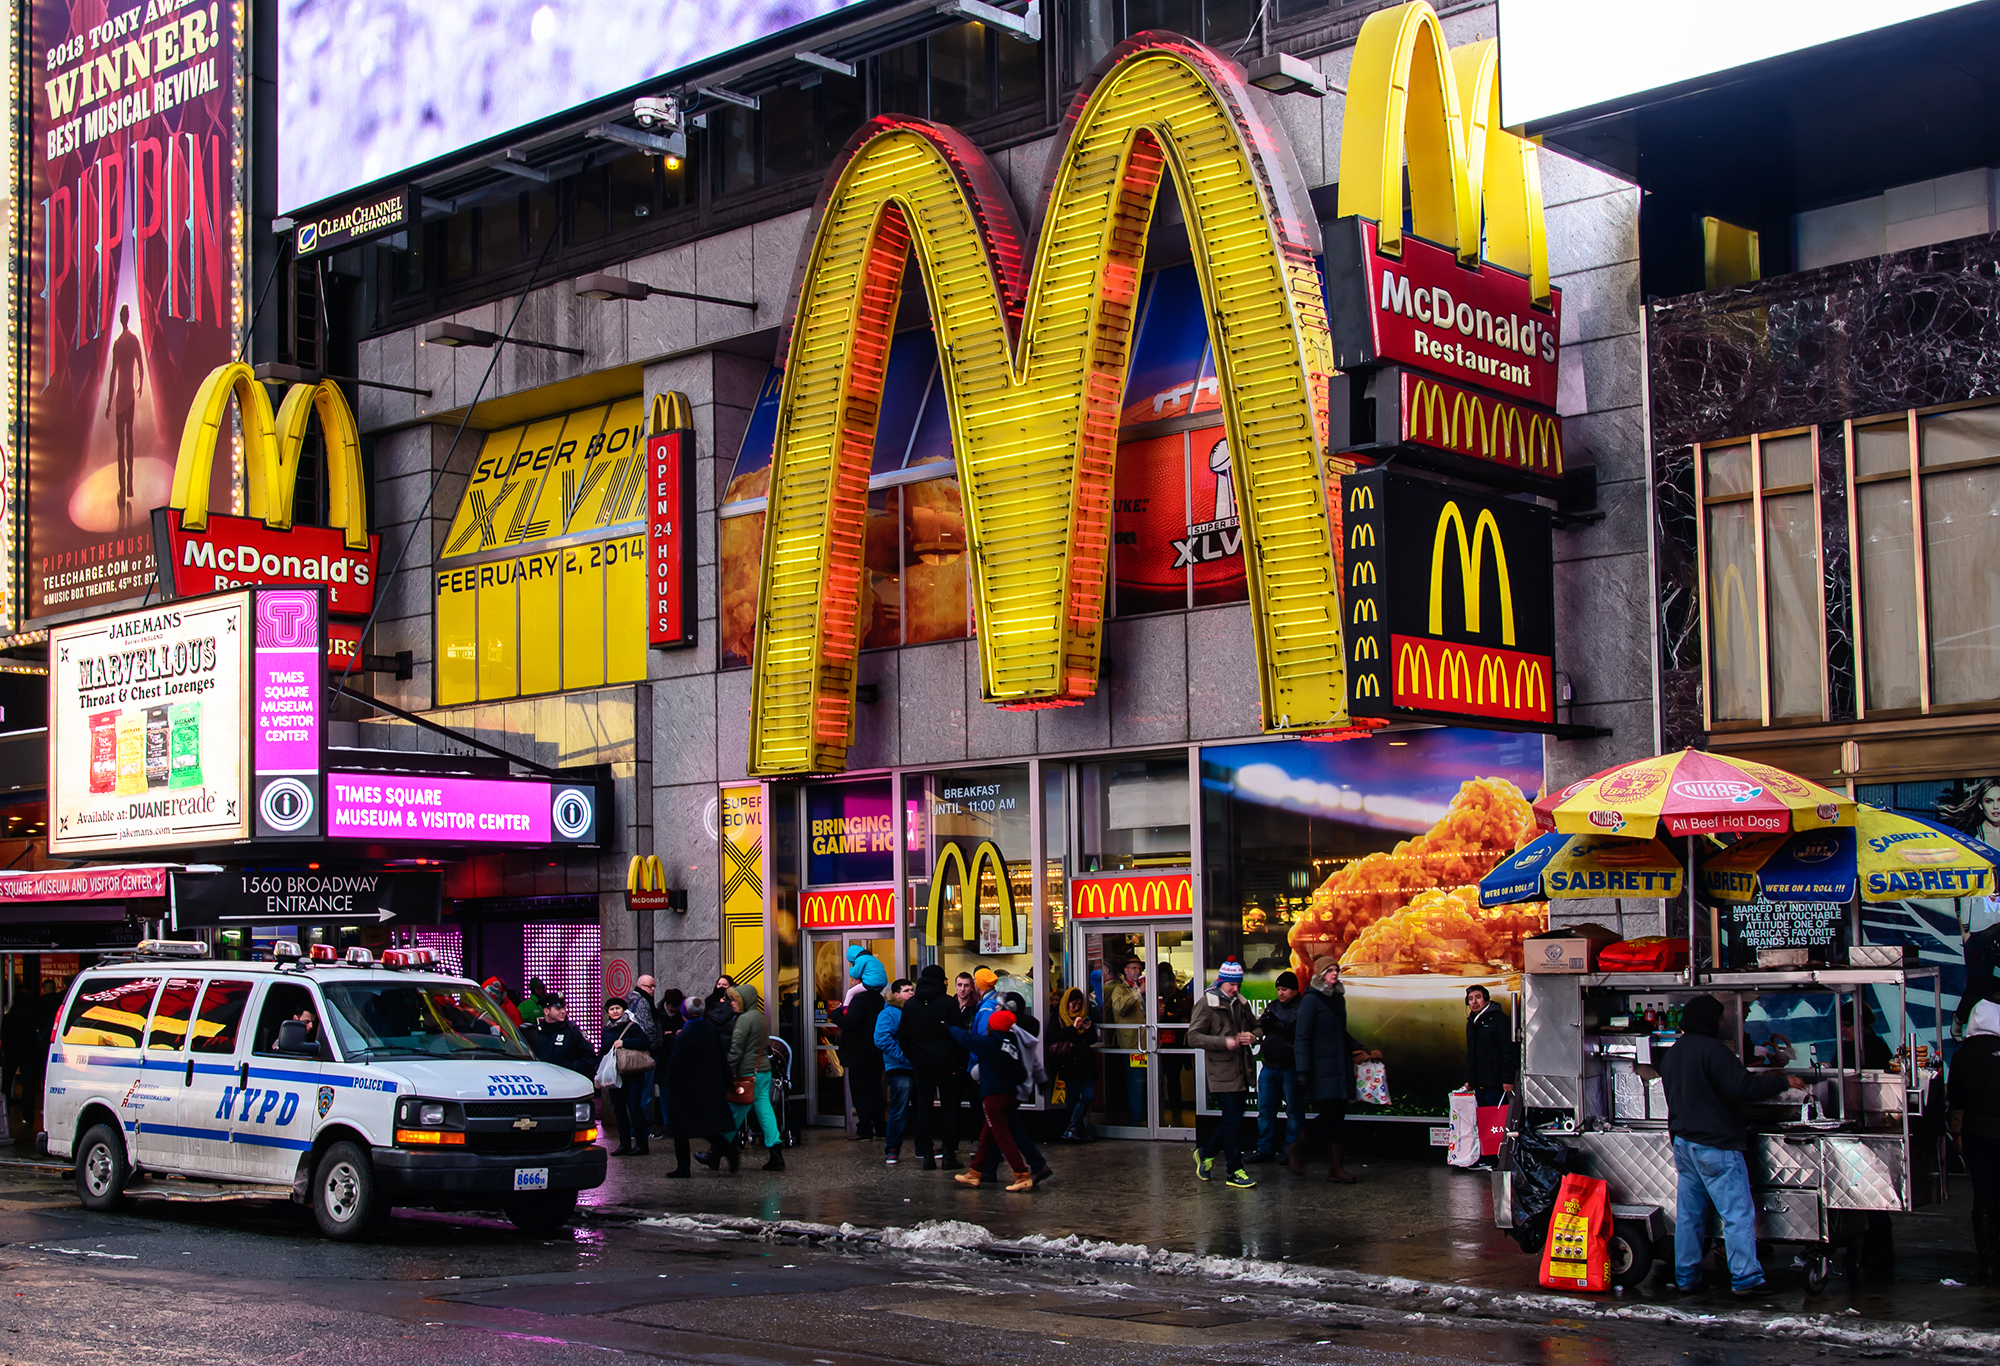 New Yorkers are bypassing food trucks for McDonalds as fast food finds new footing